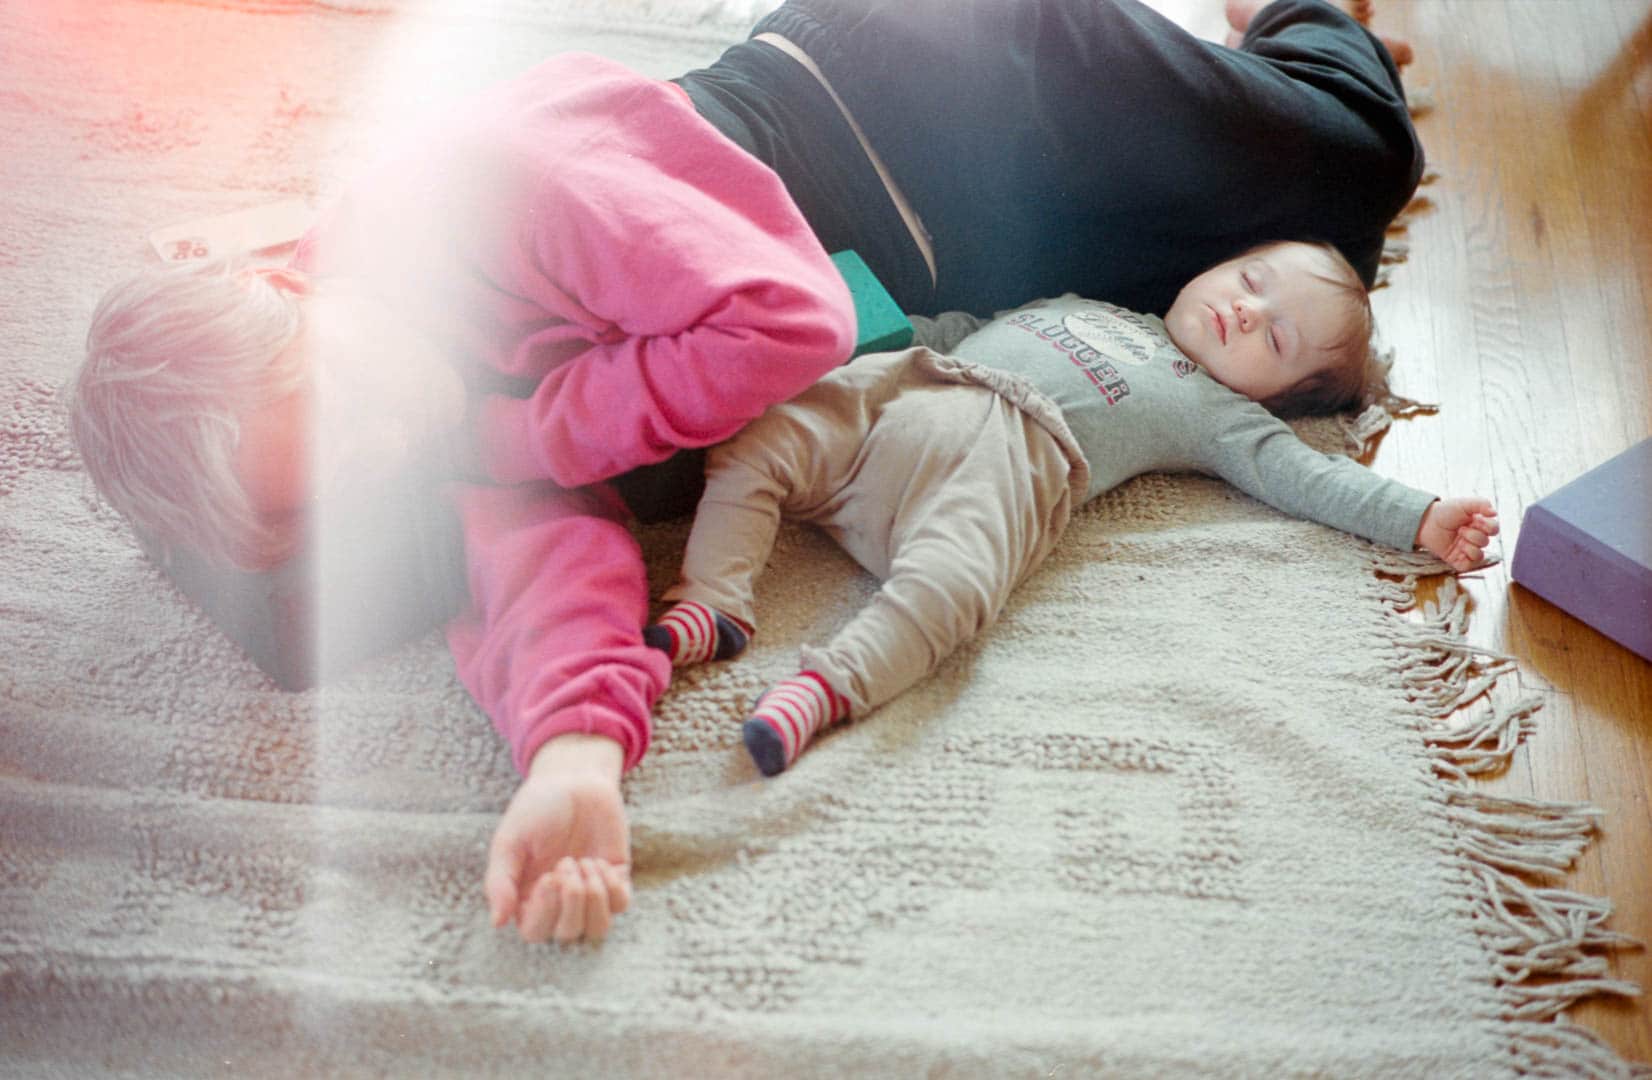 A woman and baby take a nap together on the floor